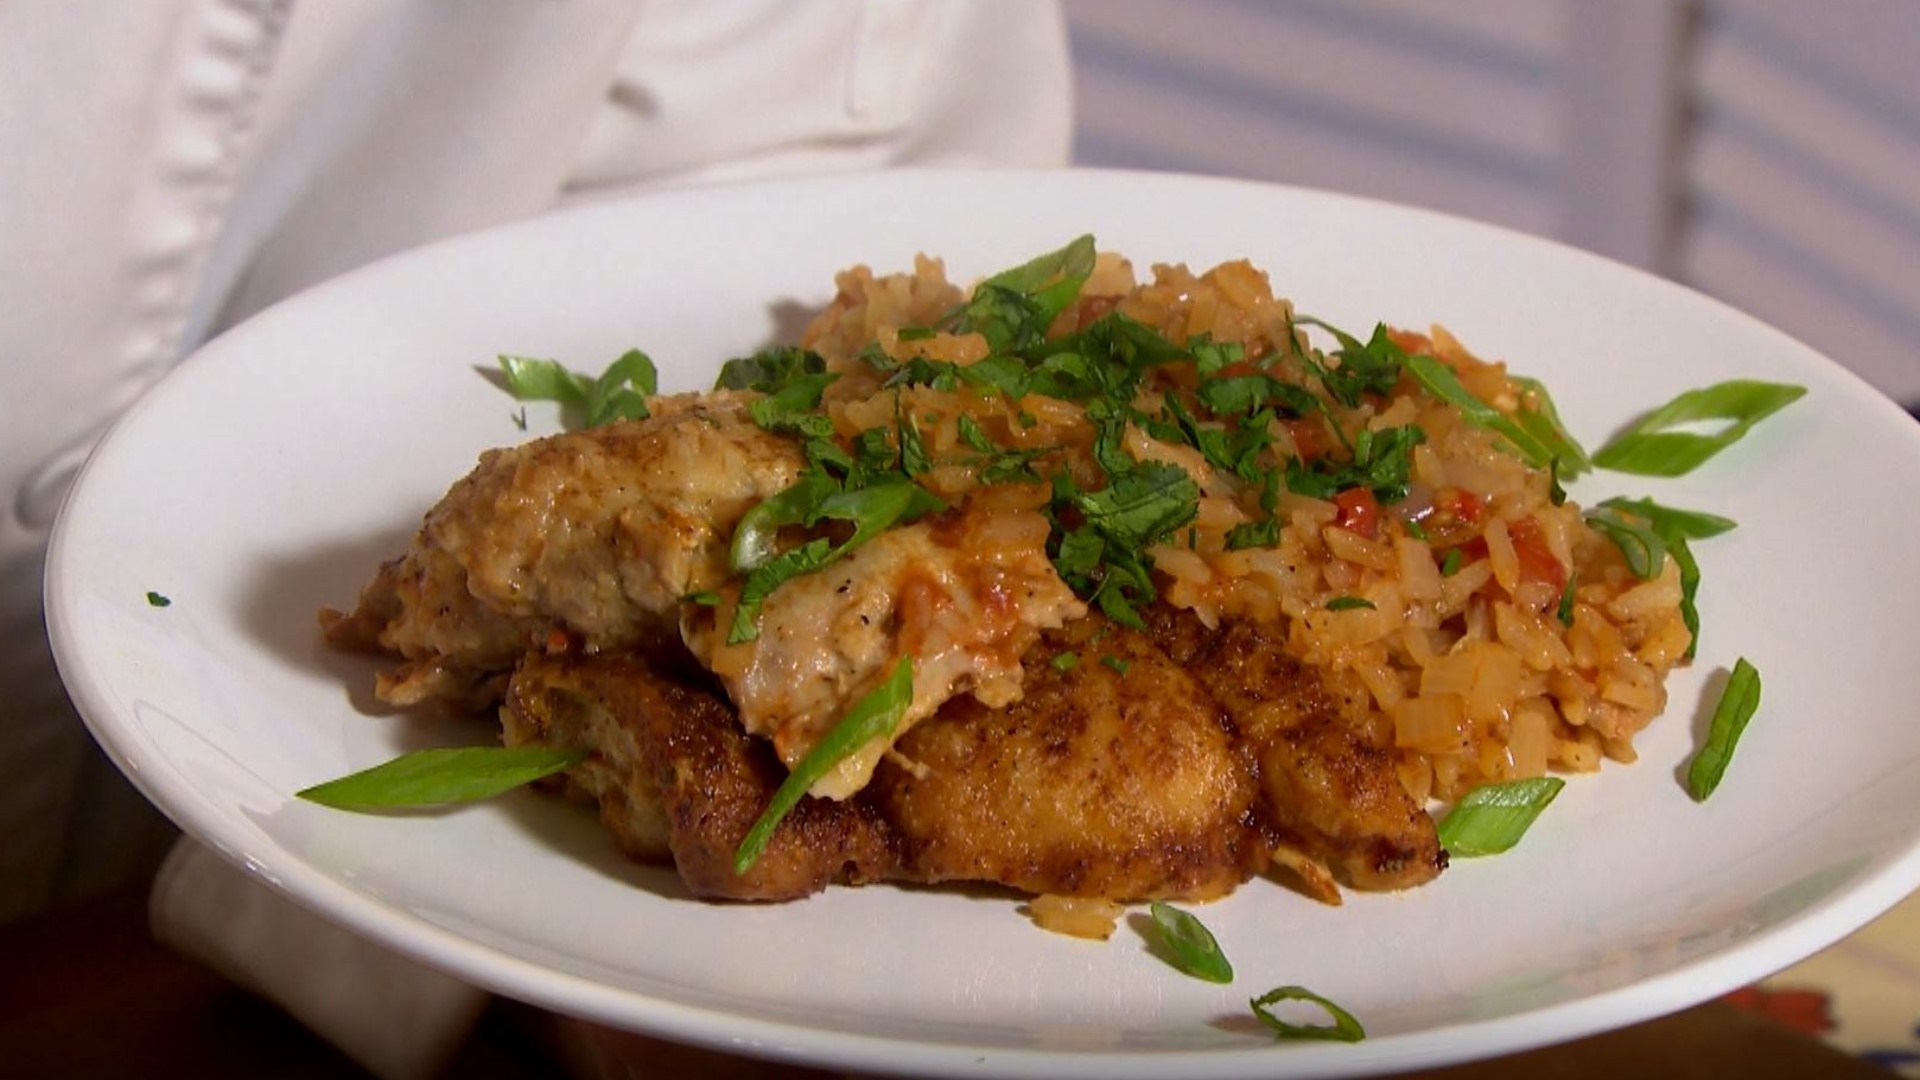 "Arroz con pollo is one of many that I learned from El Torito, it is Mexican comfort food!"